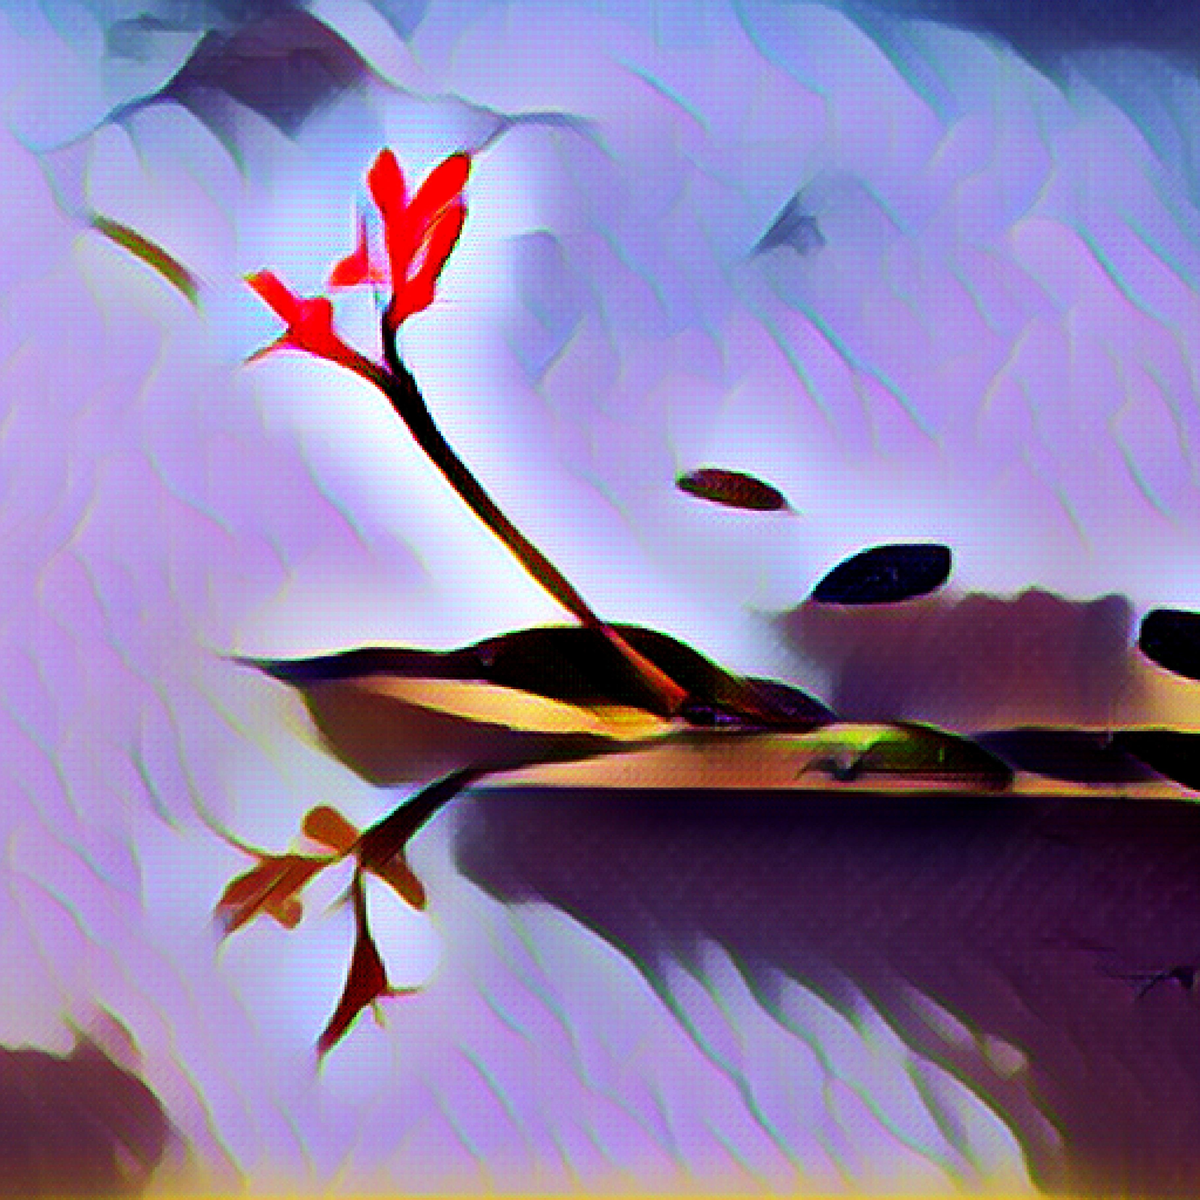 painter filter on a photo of a flower with a single cherry red blossom floating on water 